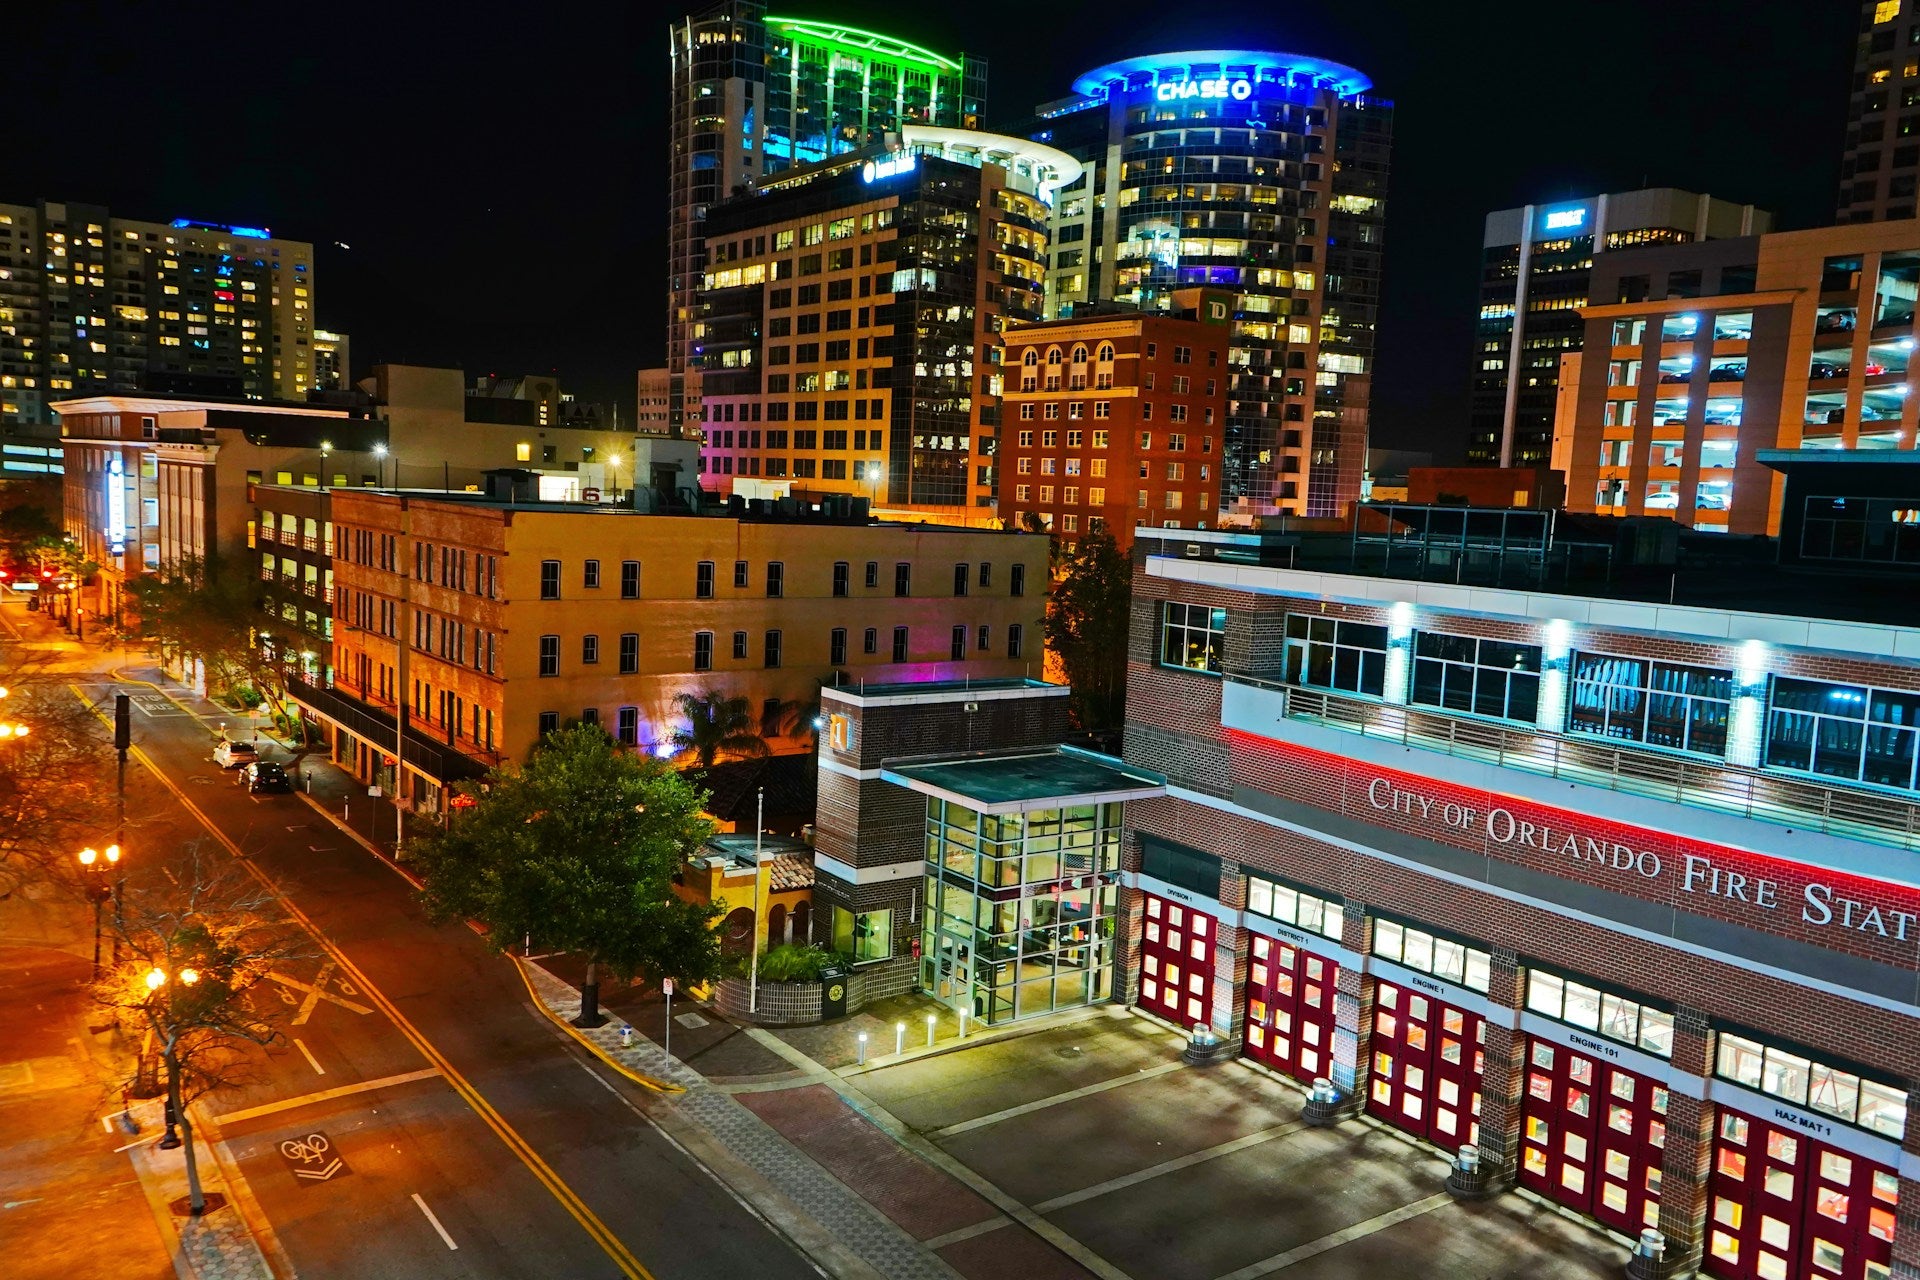 Orlando, Florida, at night. A sky view of the city's fire station, lit up.